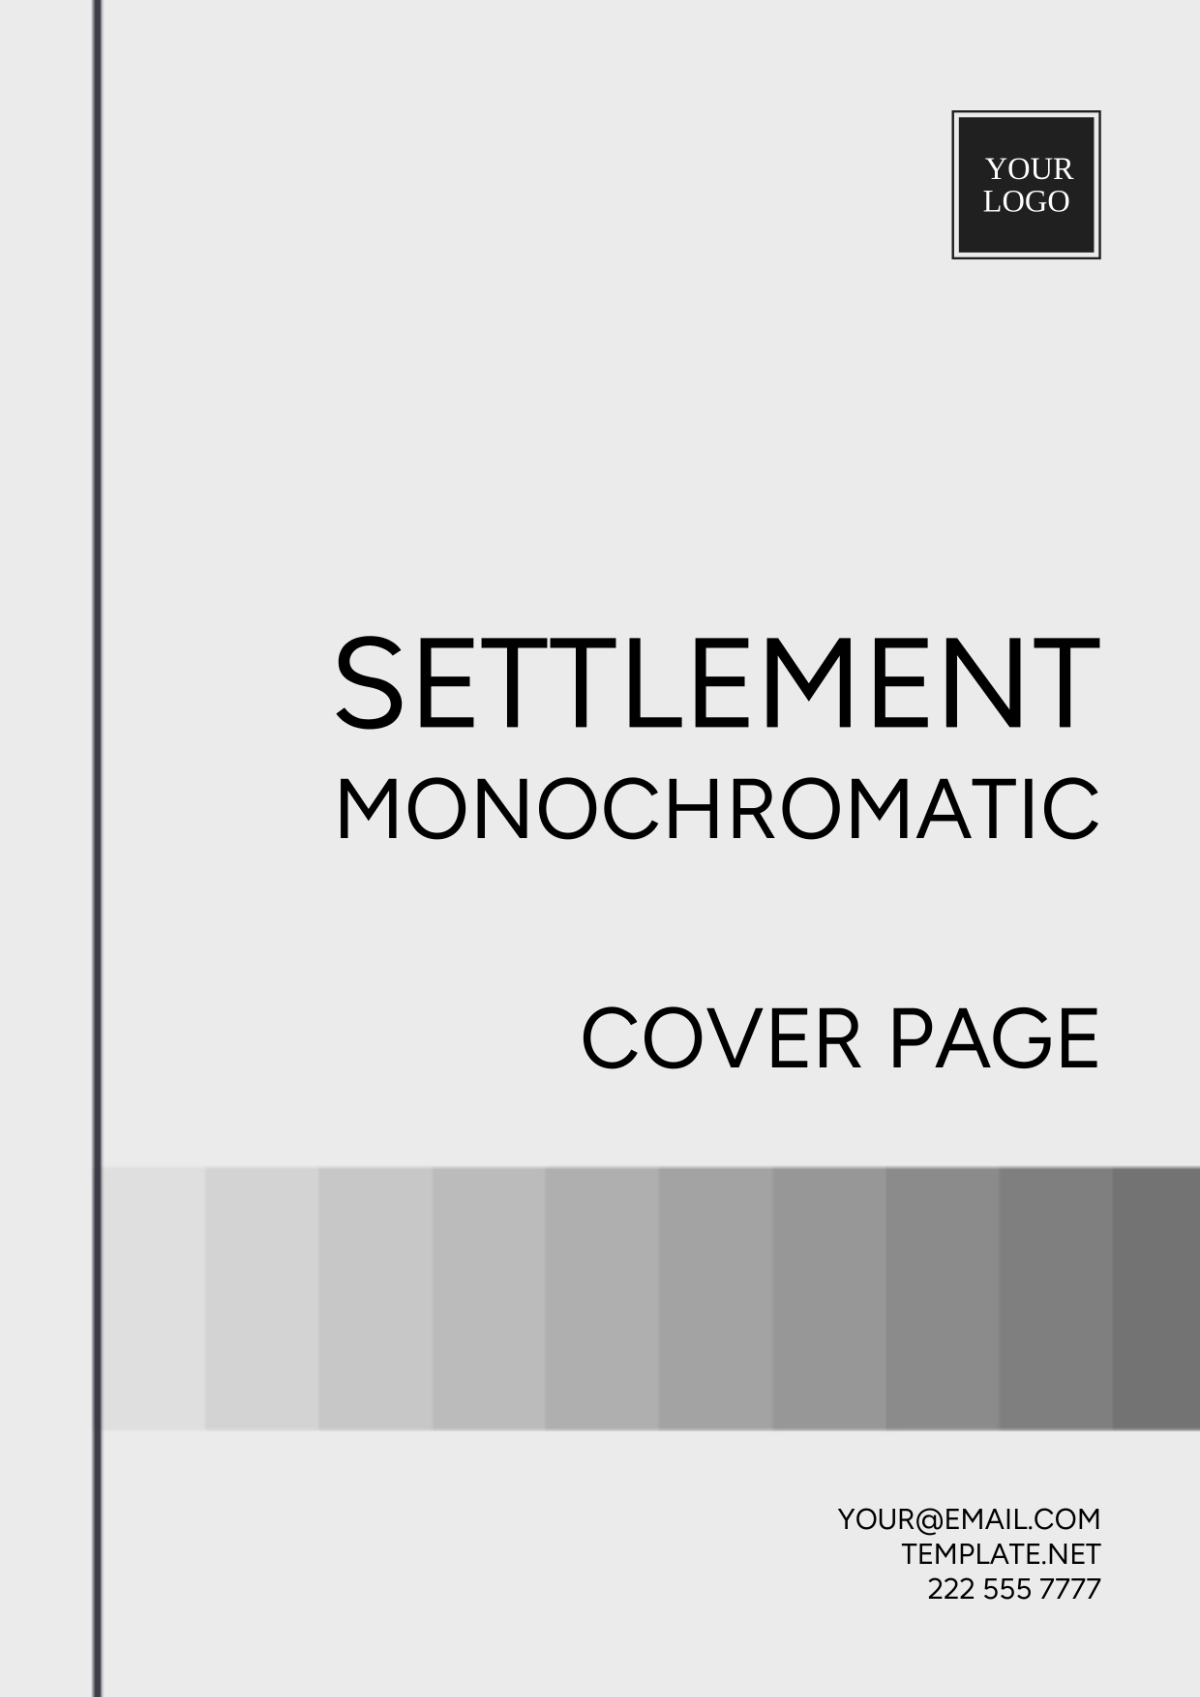 Free Settlement Monochromatic Cover Page Template